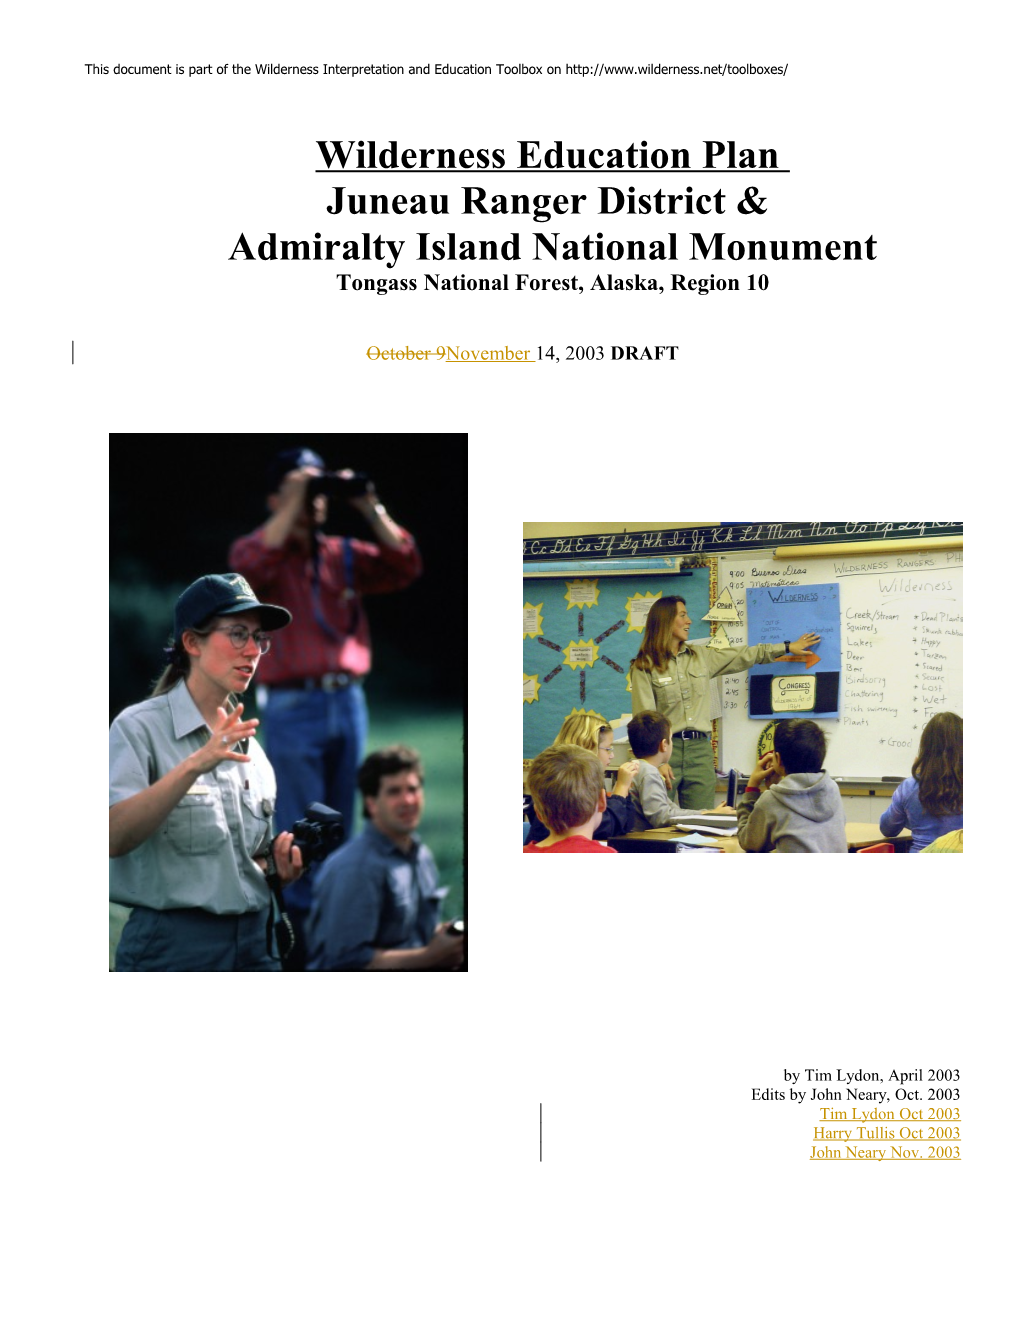 Education Plan for Juneau Ranger District & Admiralty Island National Monument